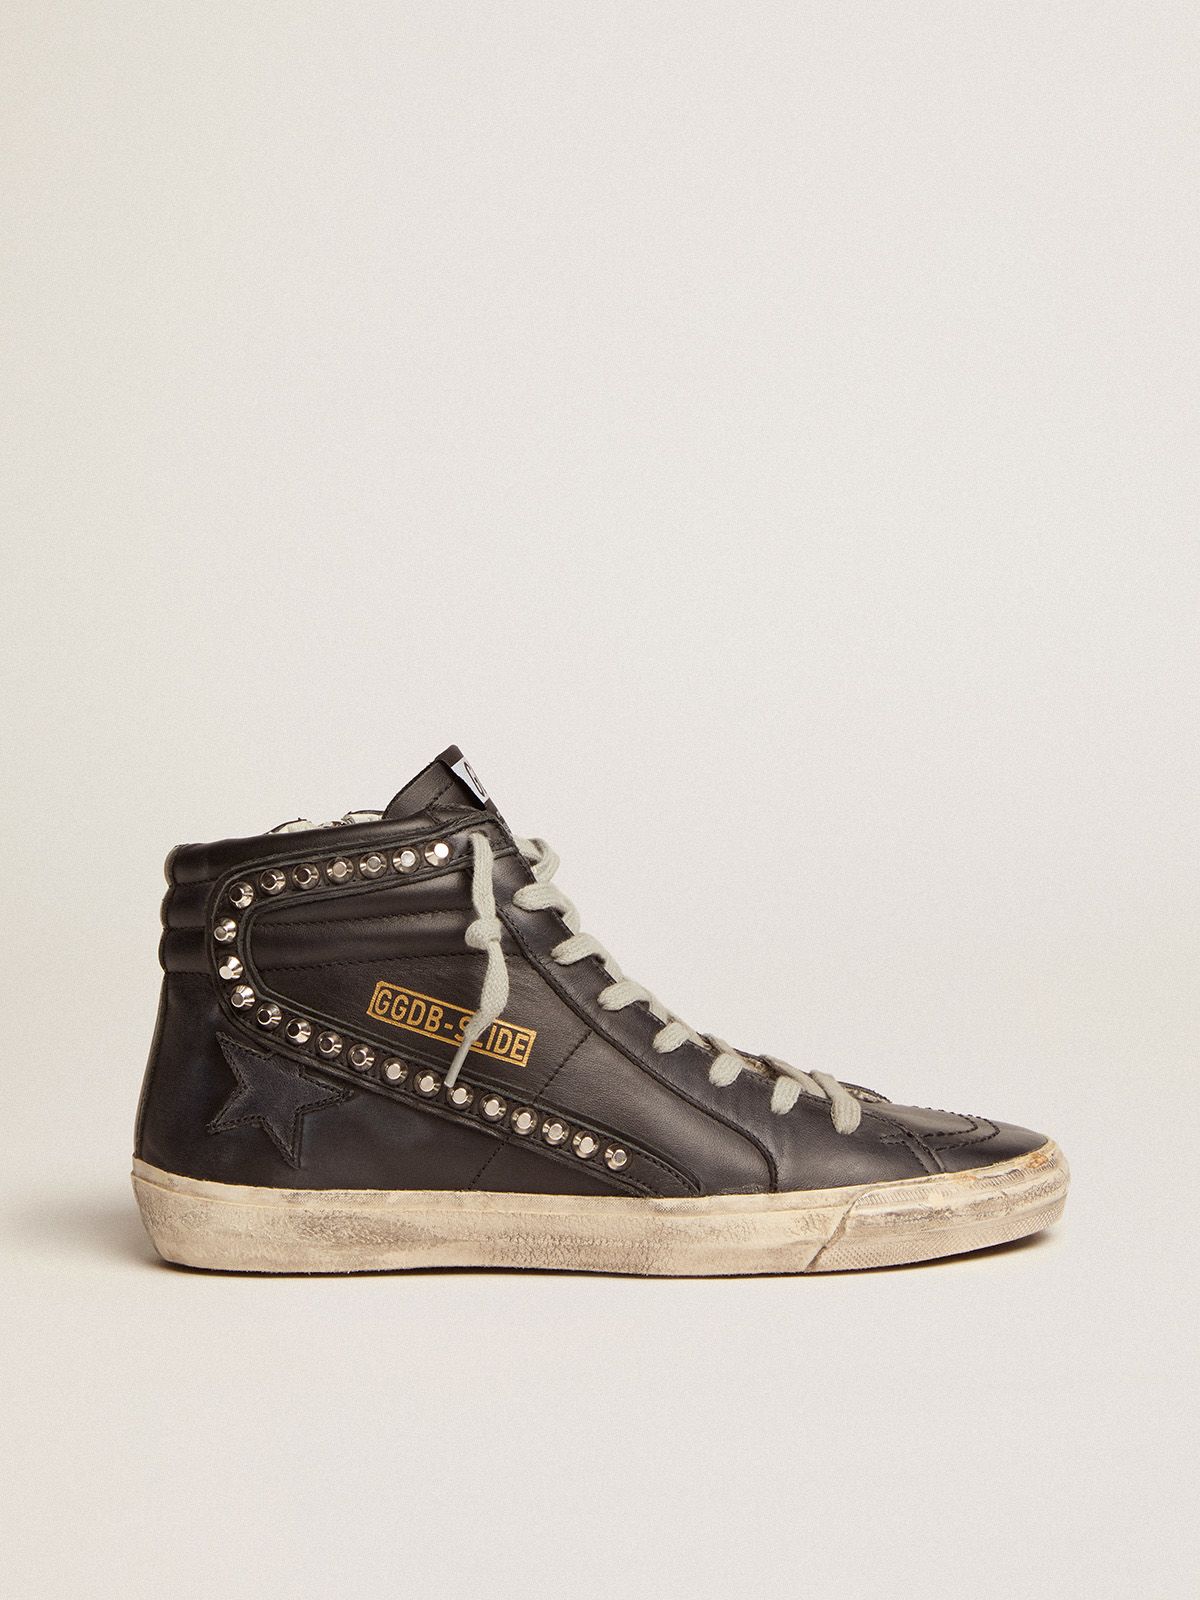 golden goose metal sneakers in studded Slide leather